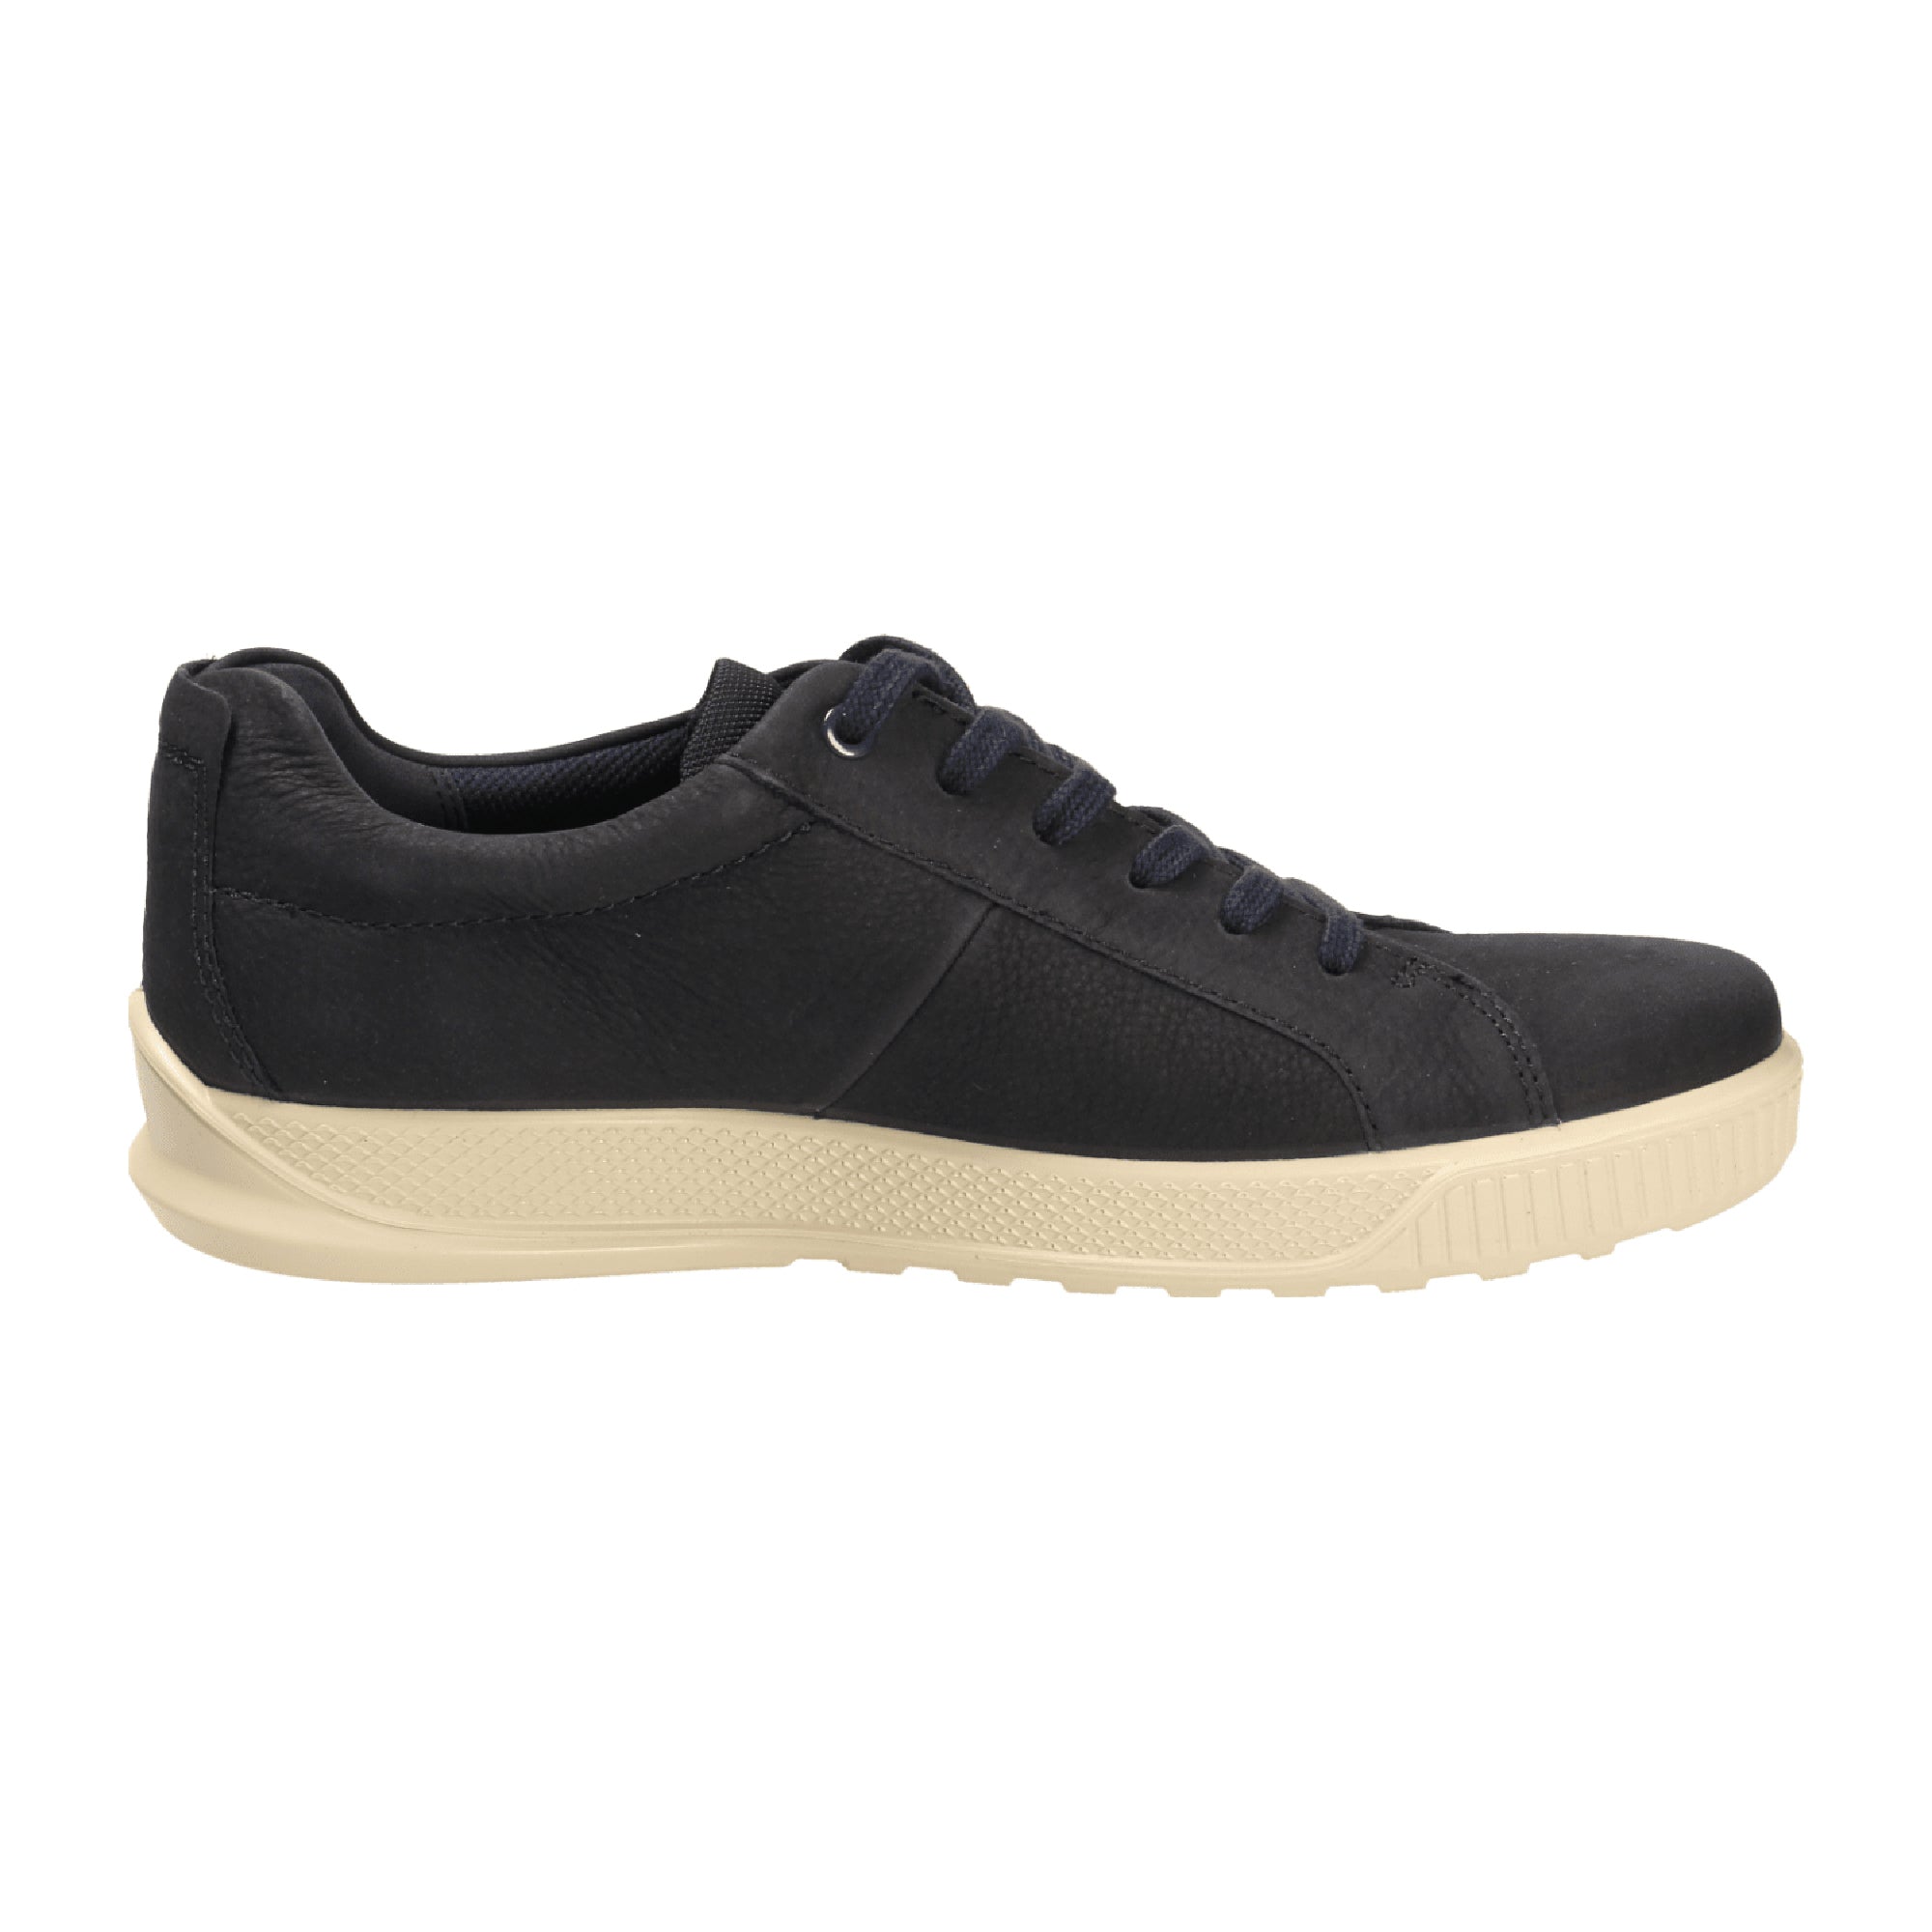 Ecco Men's Blue Shoes - Durable & Stylish Footwear for Young Adults